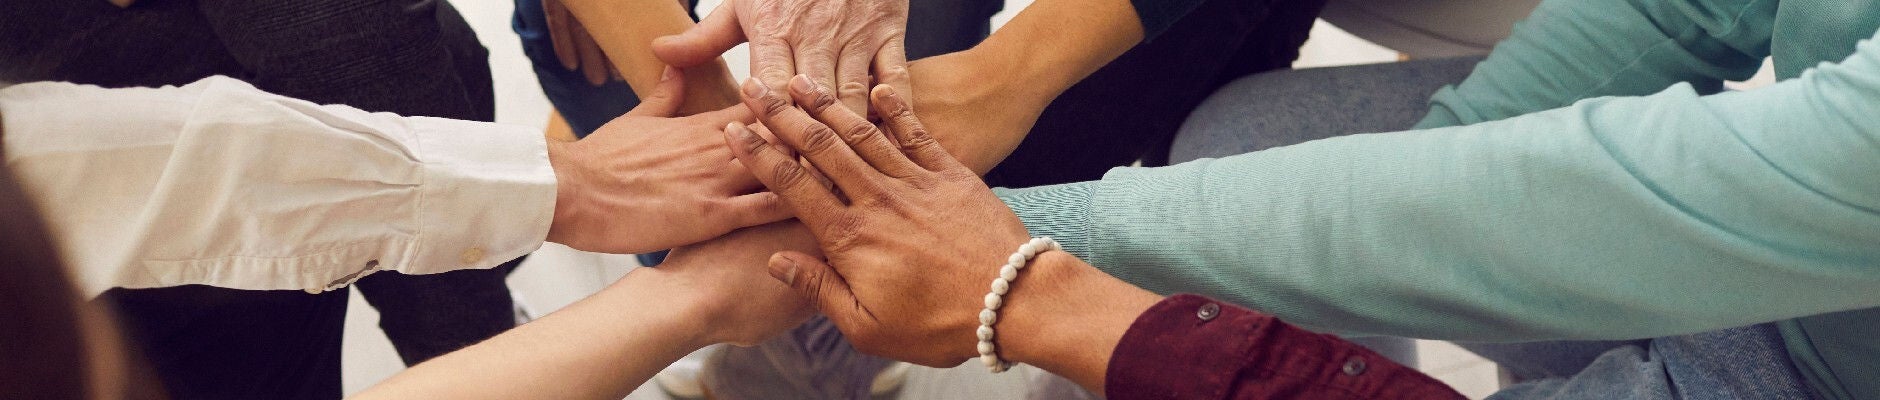 hands of various people placed together in a huddle